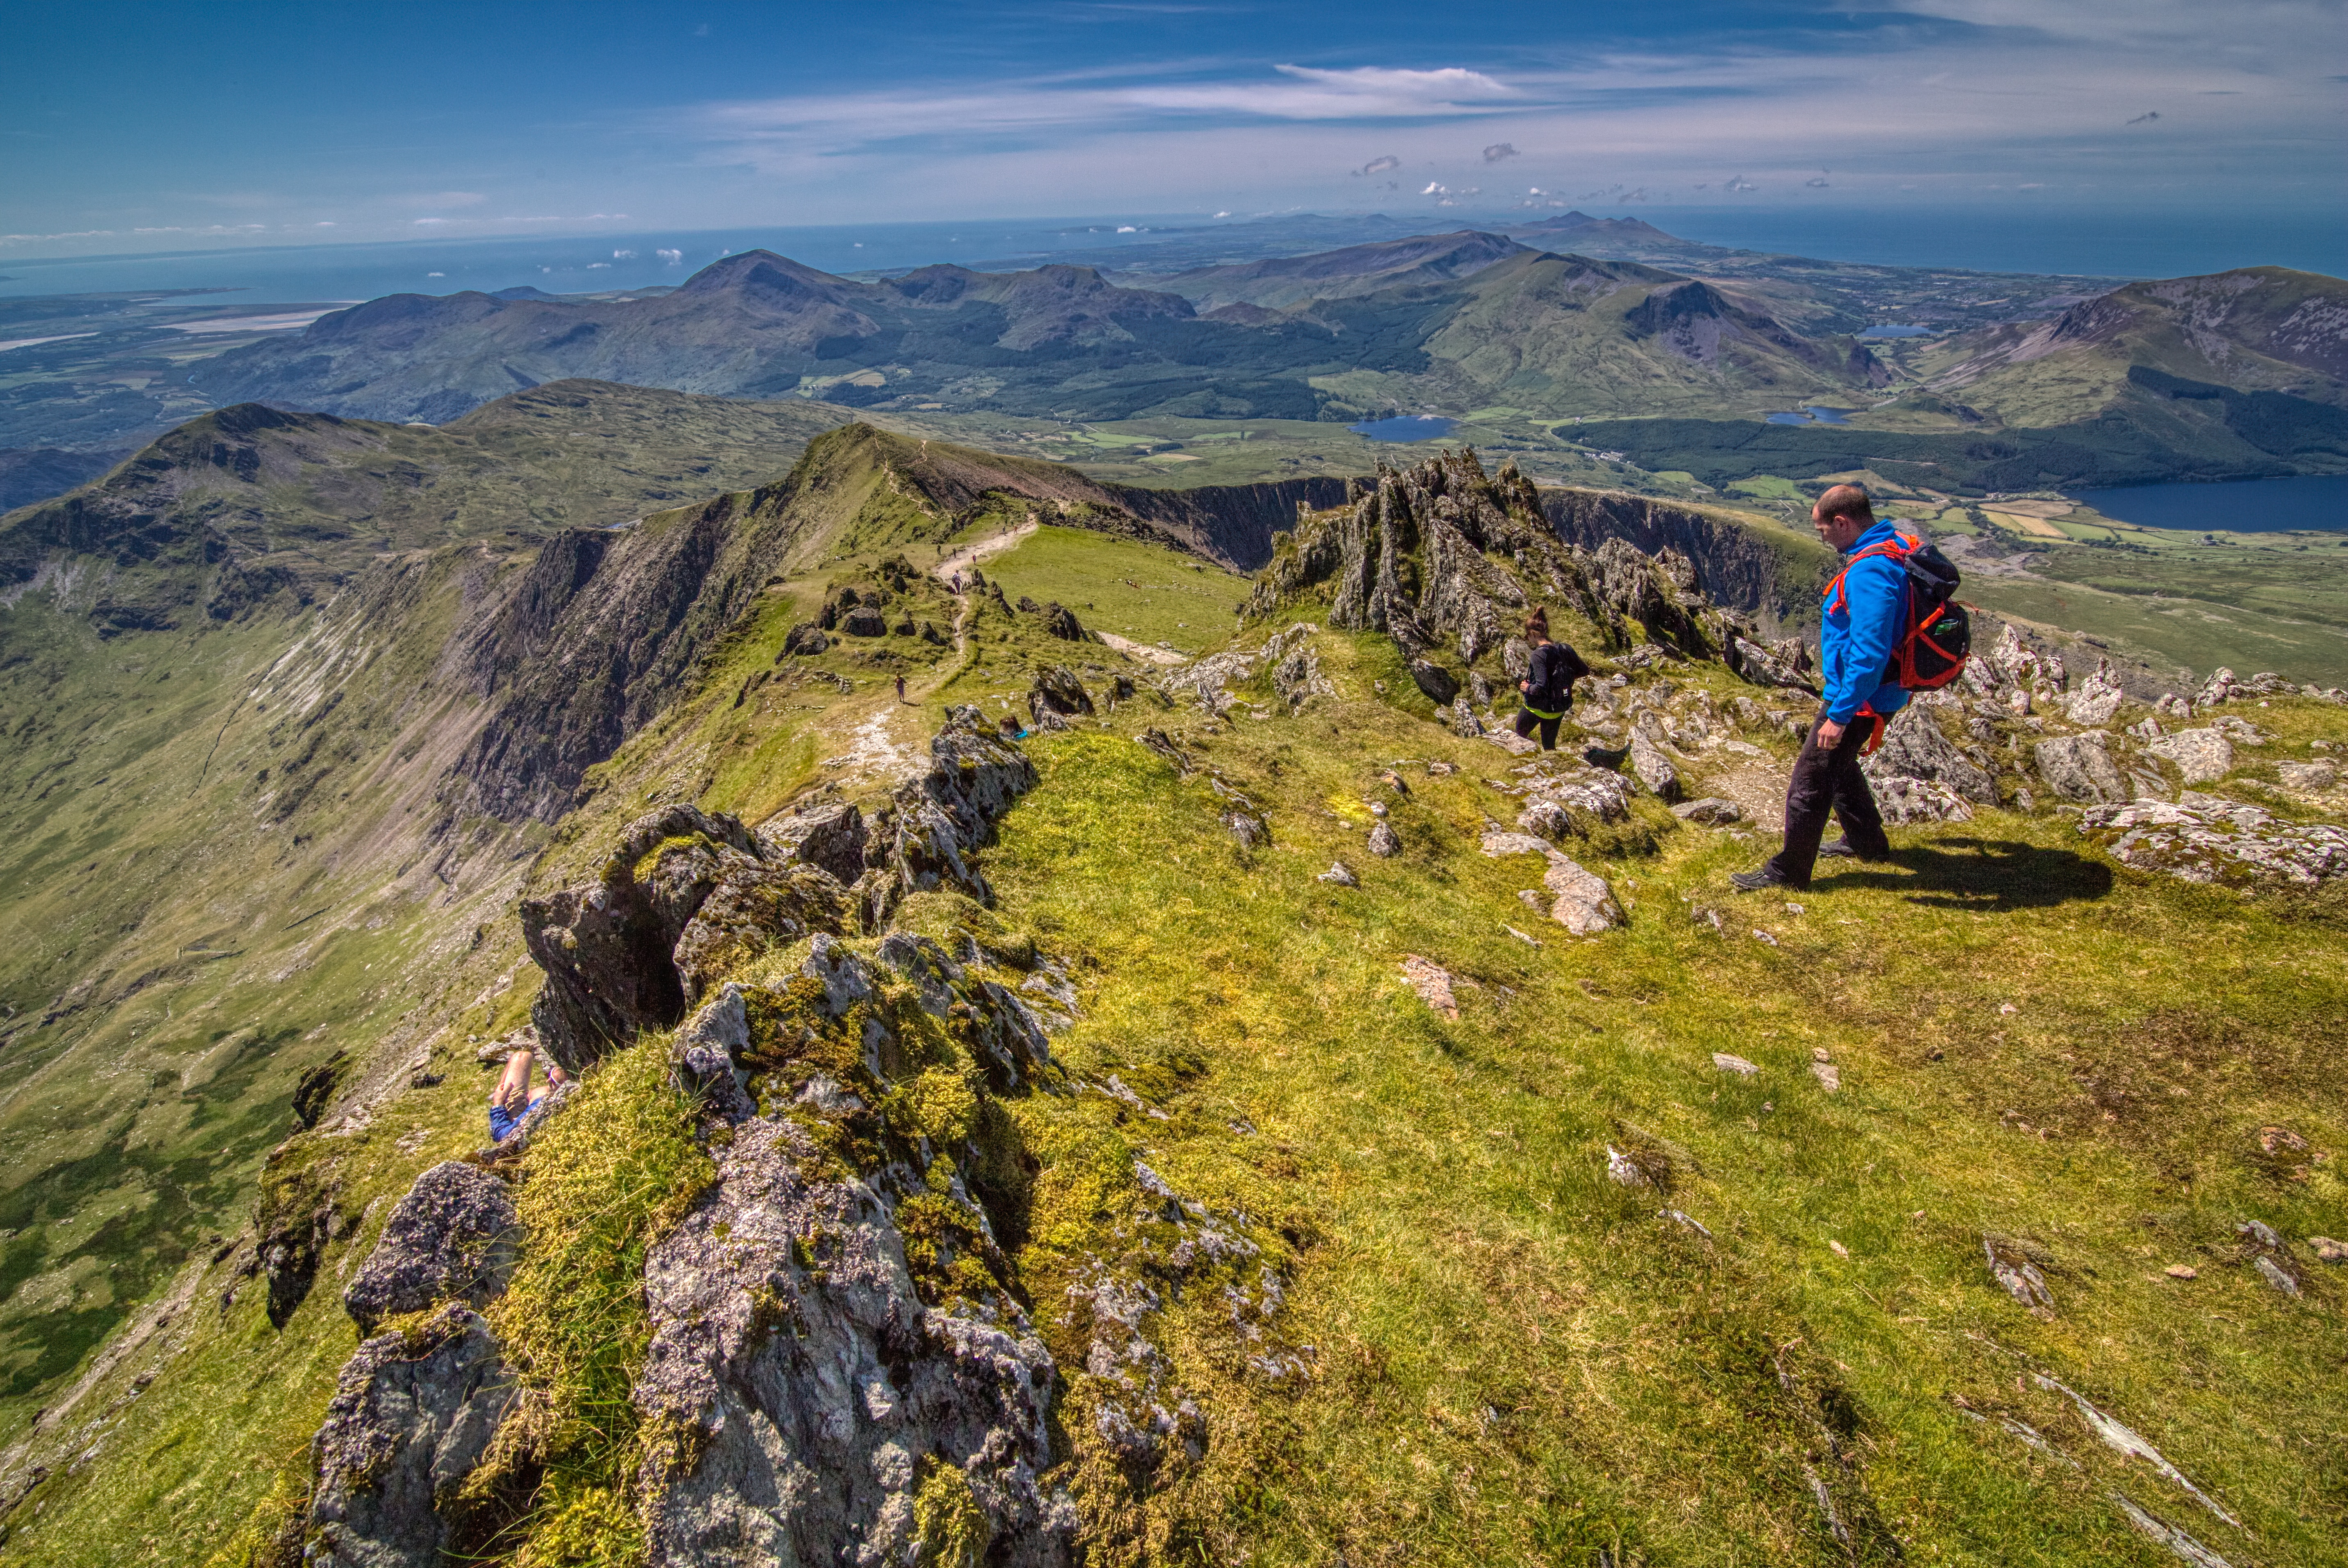 Hiking Snowdon: The 6 Routes to the Summit & Packing List